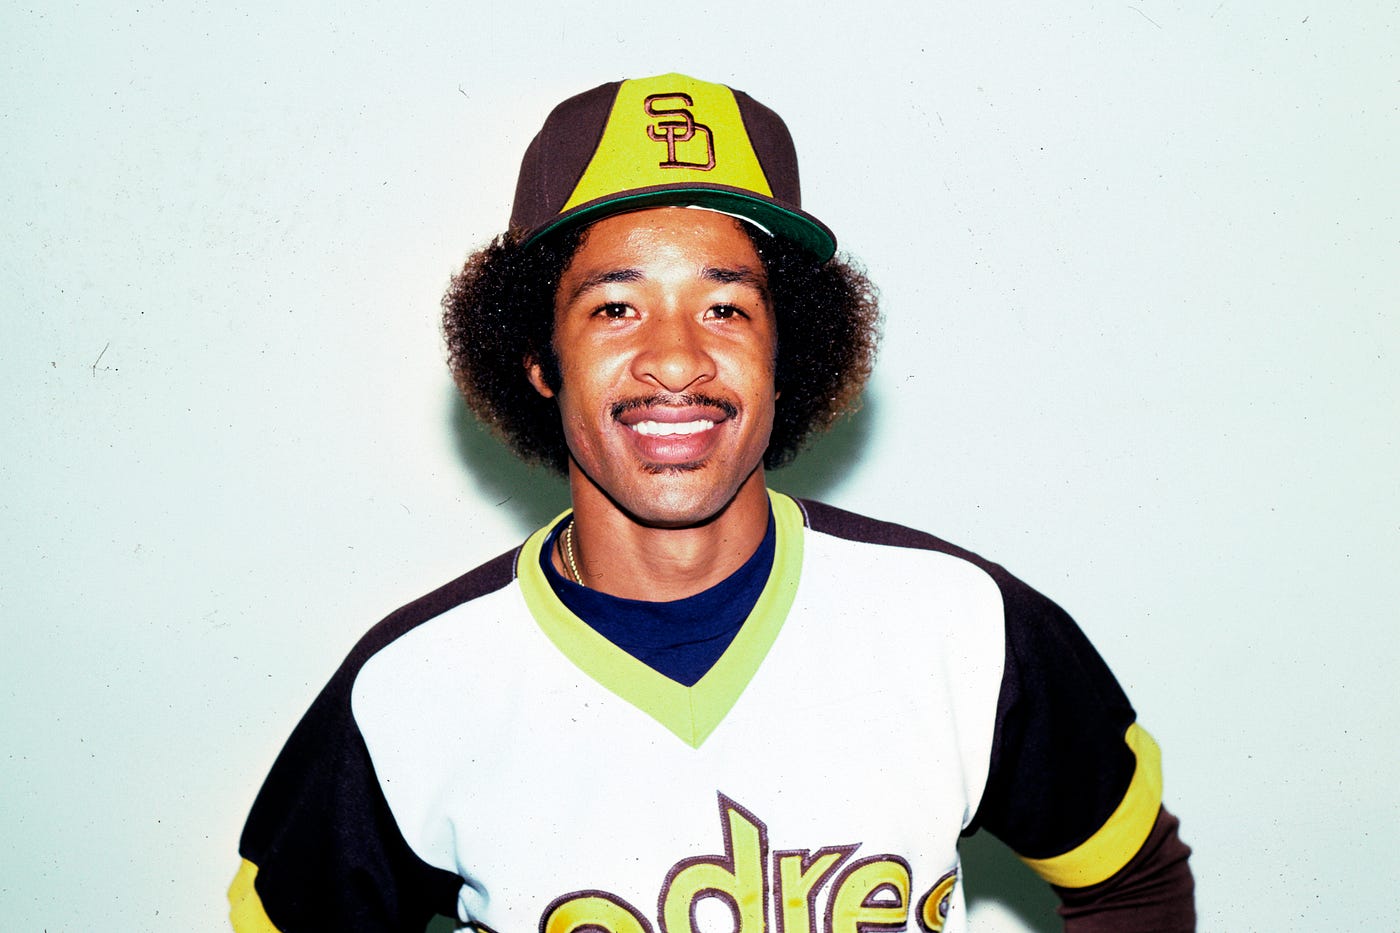 This Day in Padres History, 4/20. Ozzie Smith's famous play, rare rainout, by FriarWire